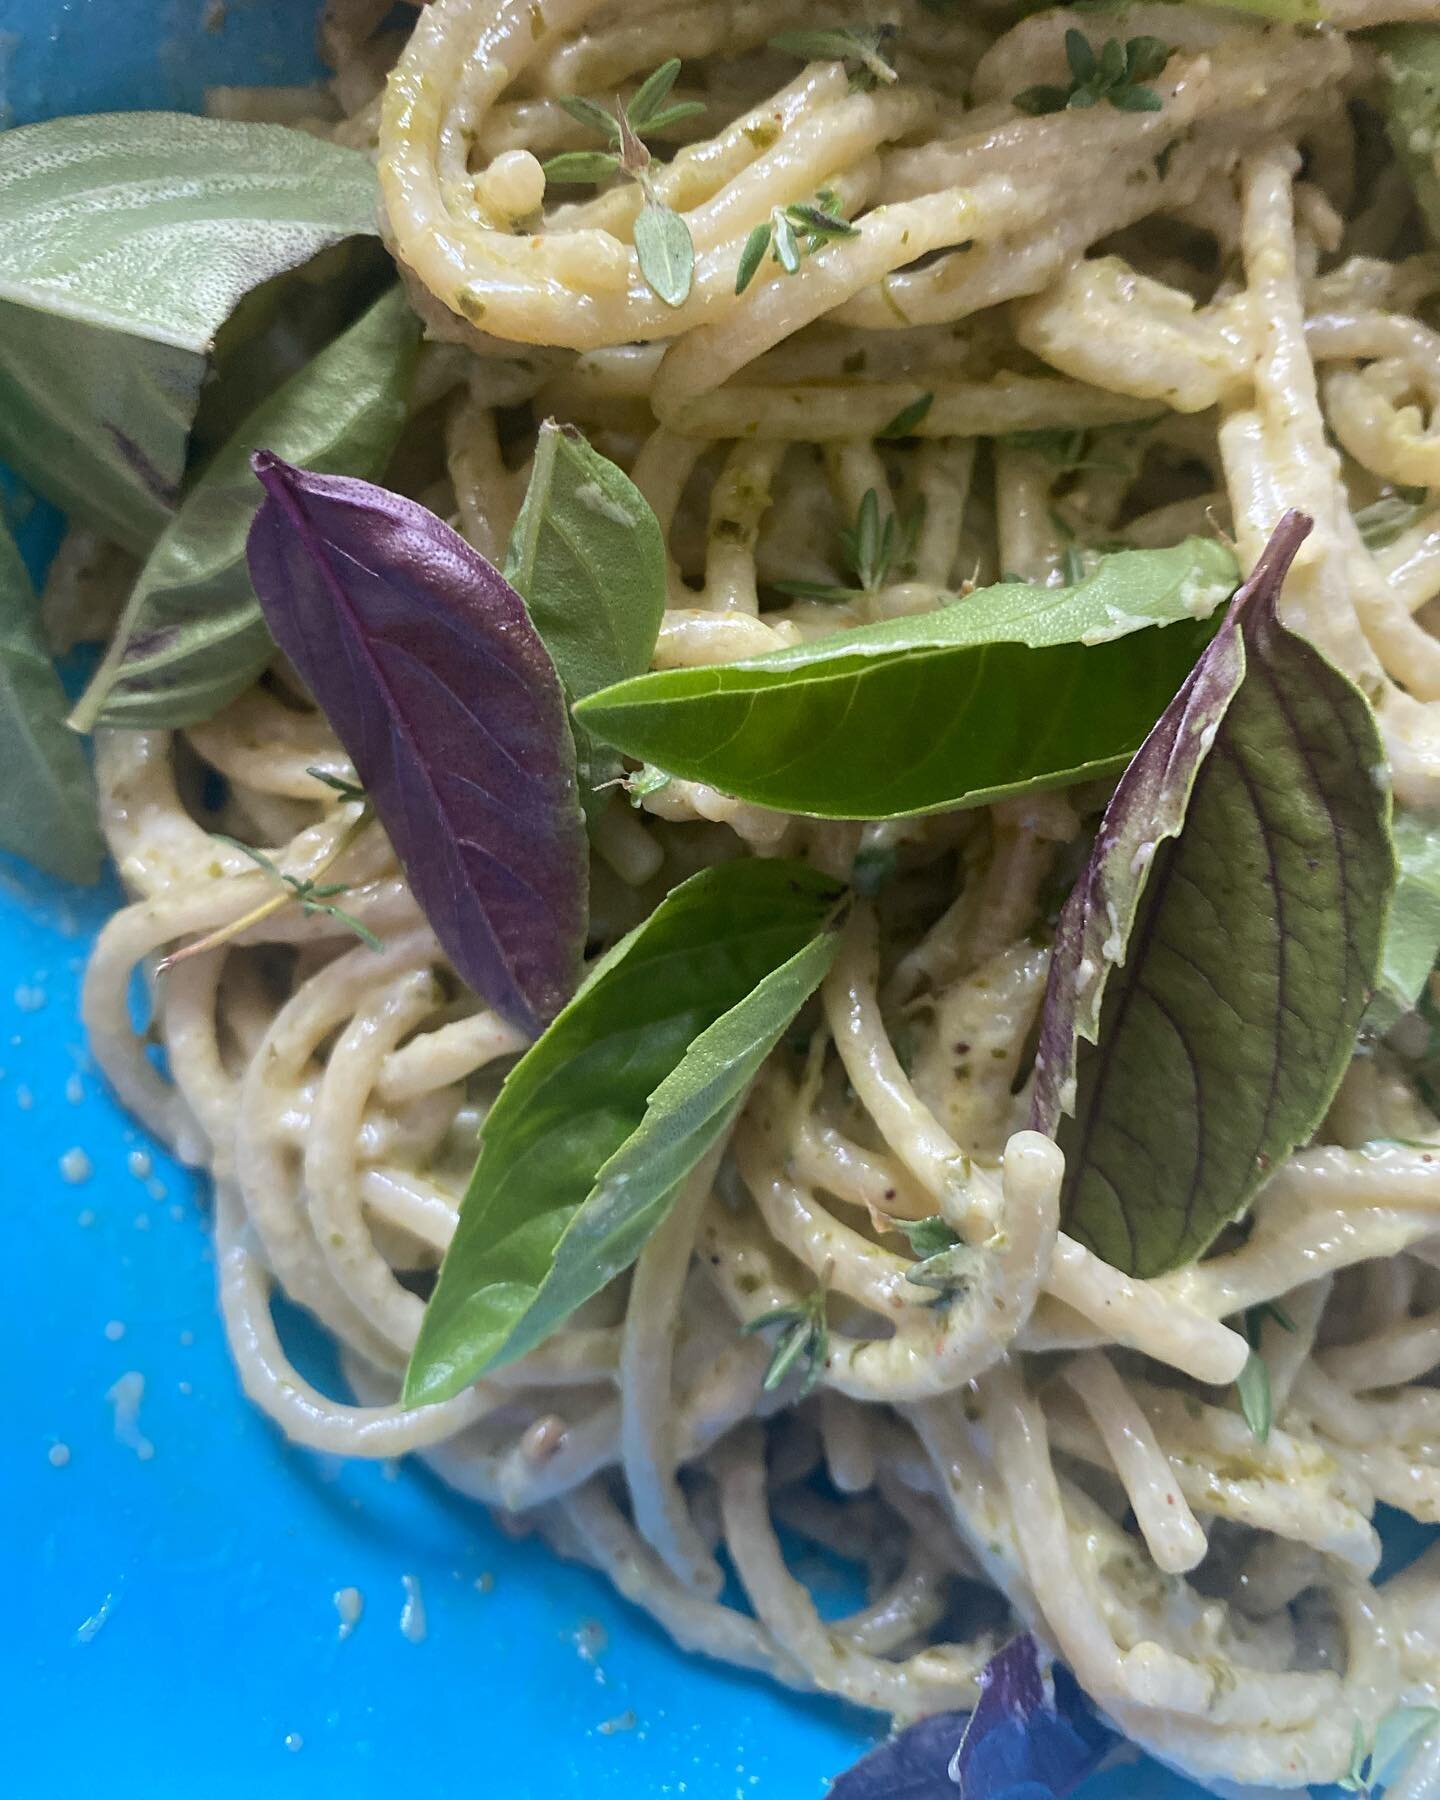 Basil pesto with red lentil pasta noodles topped with hemp seeds and purple basil and thyme. Would you try this?
*
*
*
*Follow @katszen_wellness
*
*
*

#plantbased #wfpb #plantbasedmpls #minneapolis #veganmpls #healthylifestyle #healthiswealth #immun